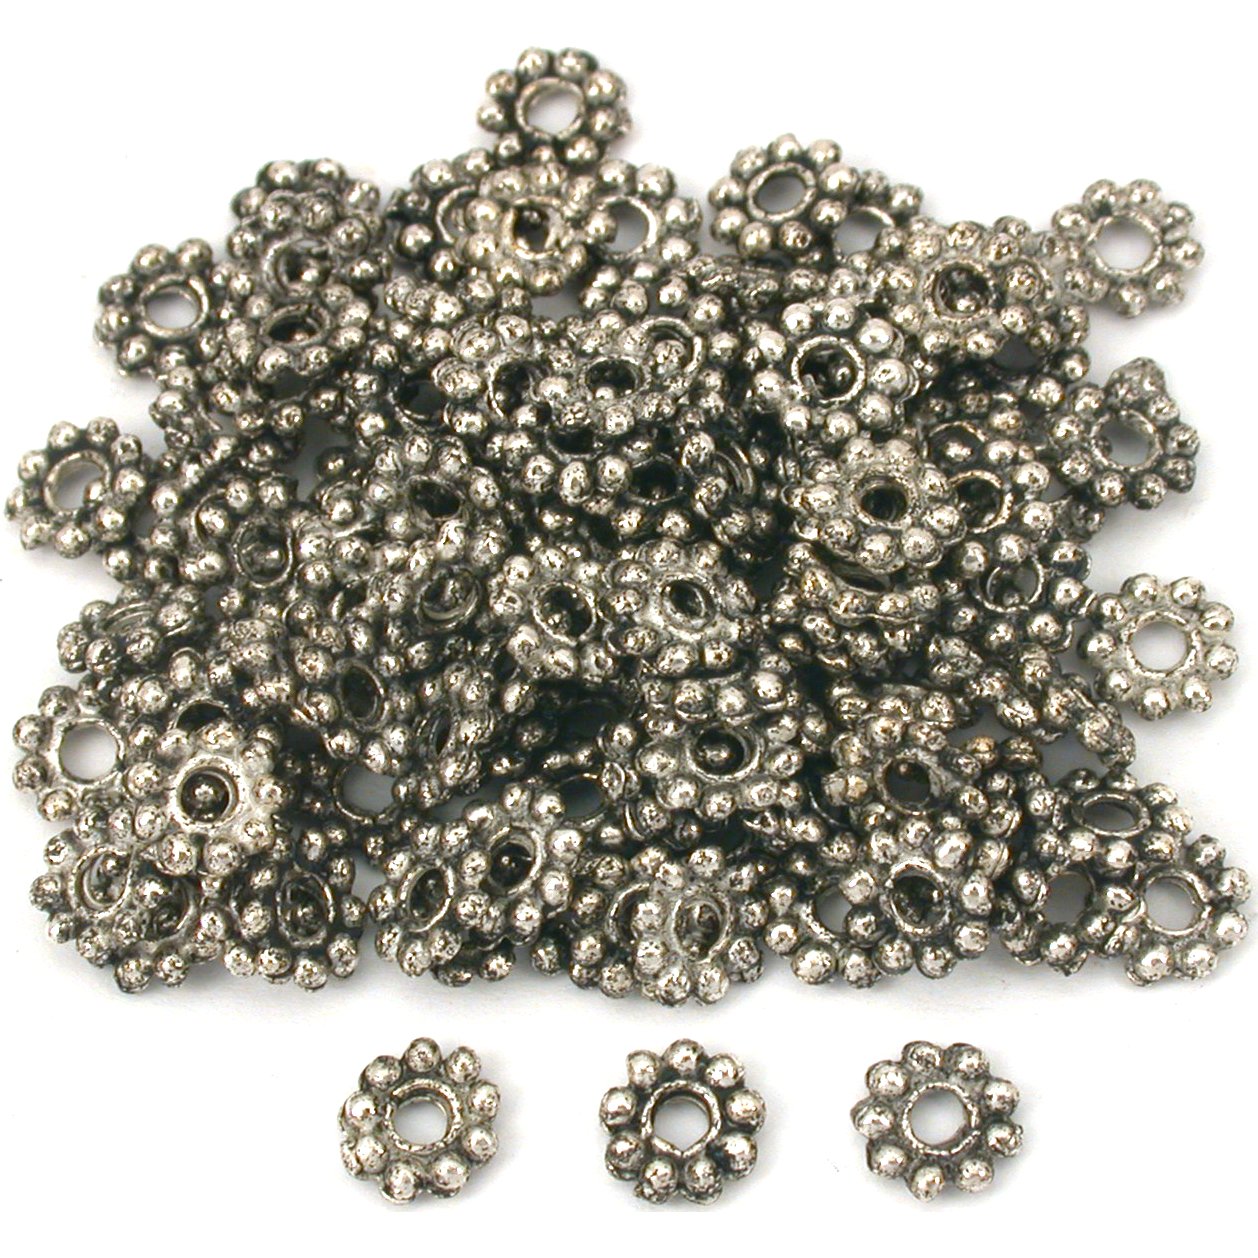 Bali Spacer Daisy Beads Antique Silver Plated 6mm 125Pcs Approx.